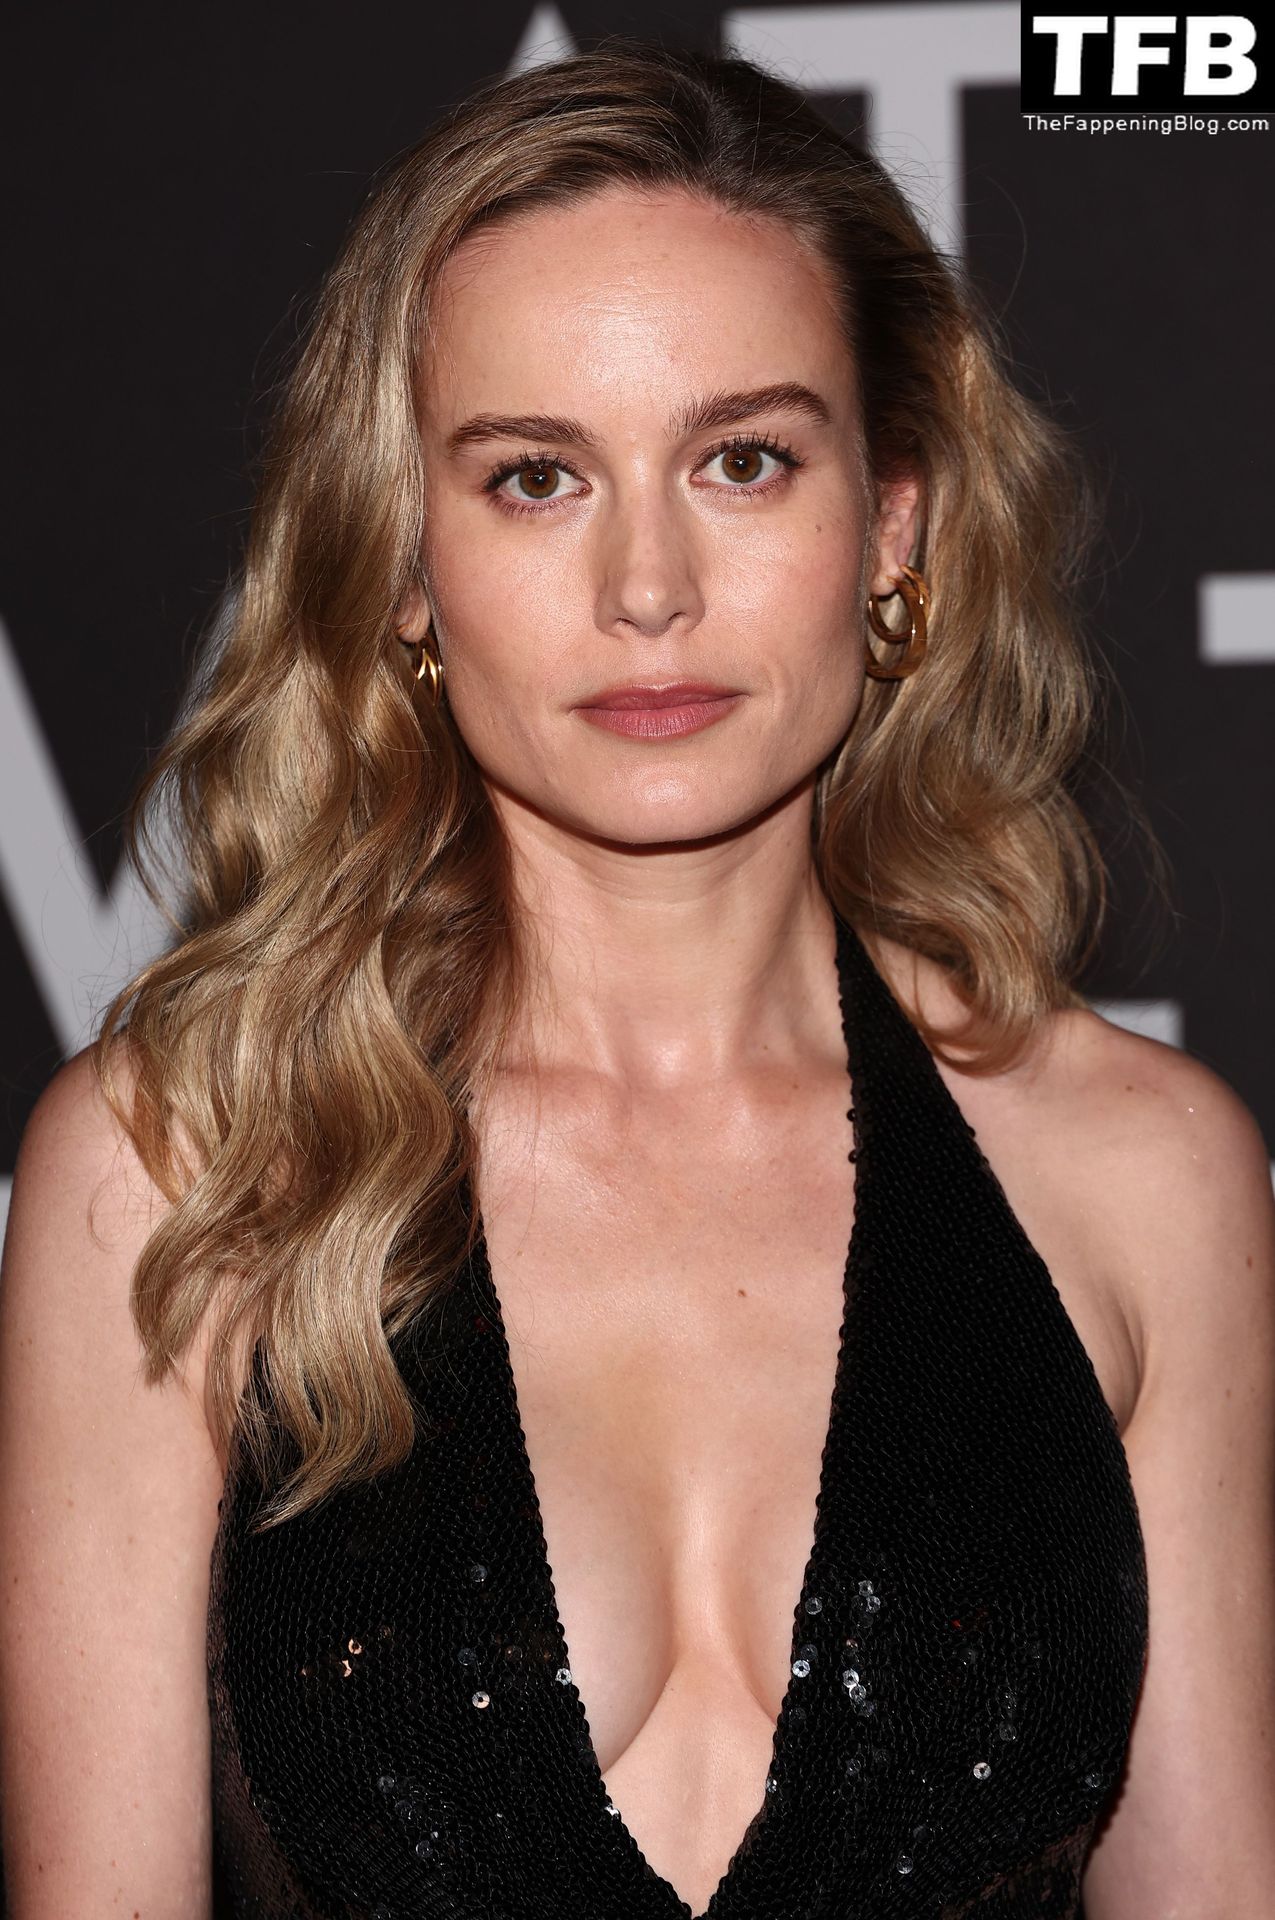 Brie-Larson-Sexy-The-Fappening-Blog-9.jpg